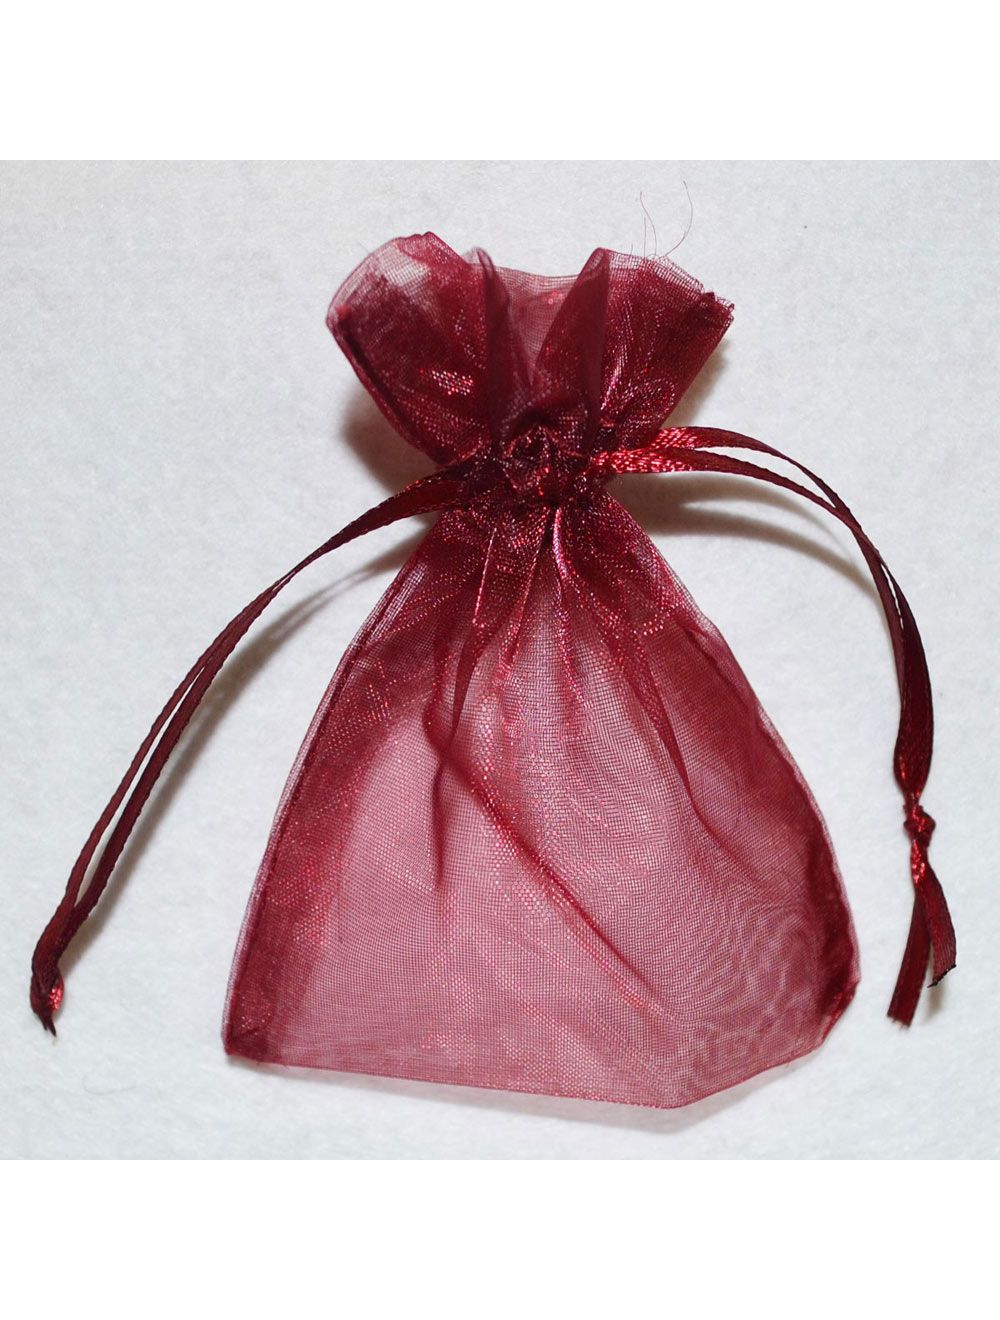 Organza Wedding Favour Bags 7.5cm x 10cm Pack of 10 